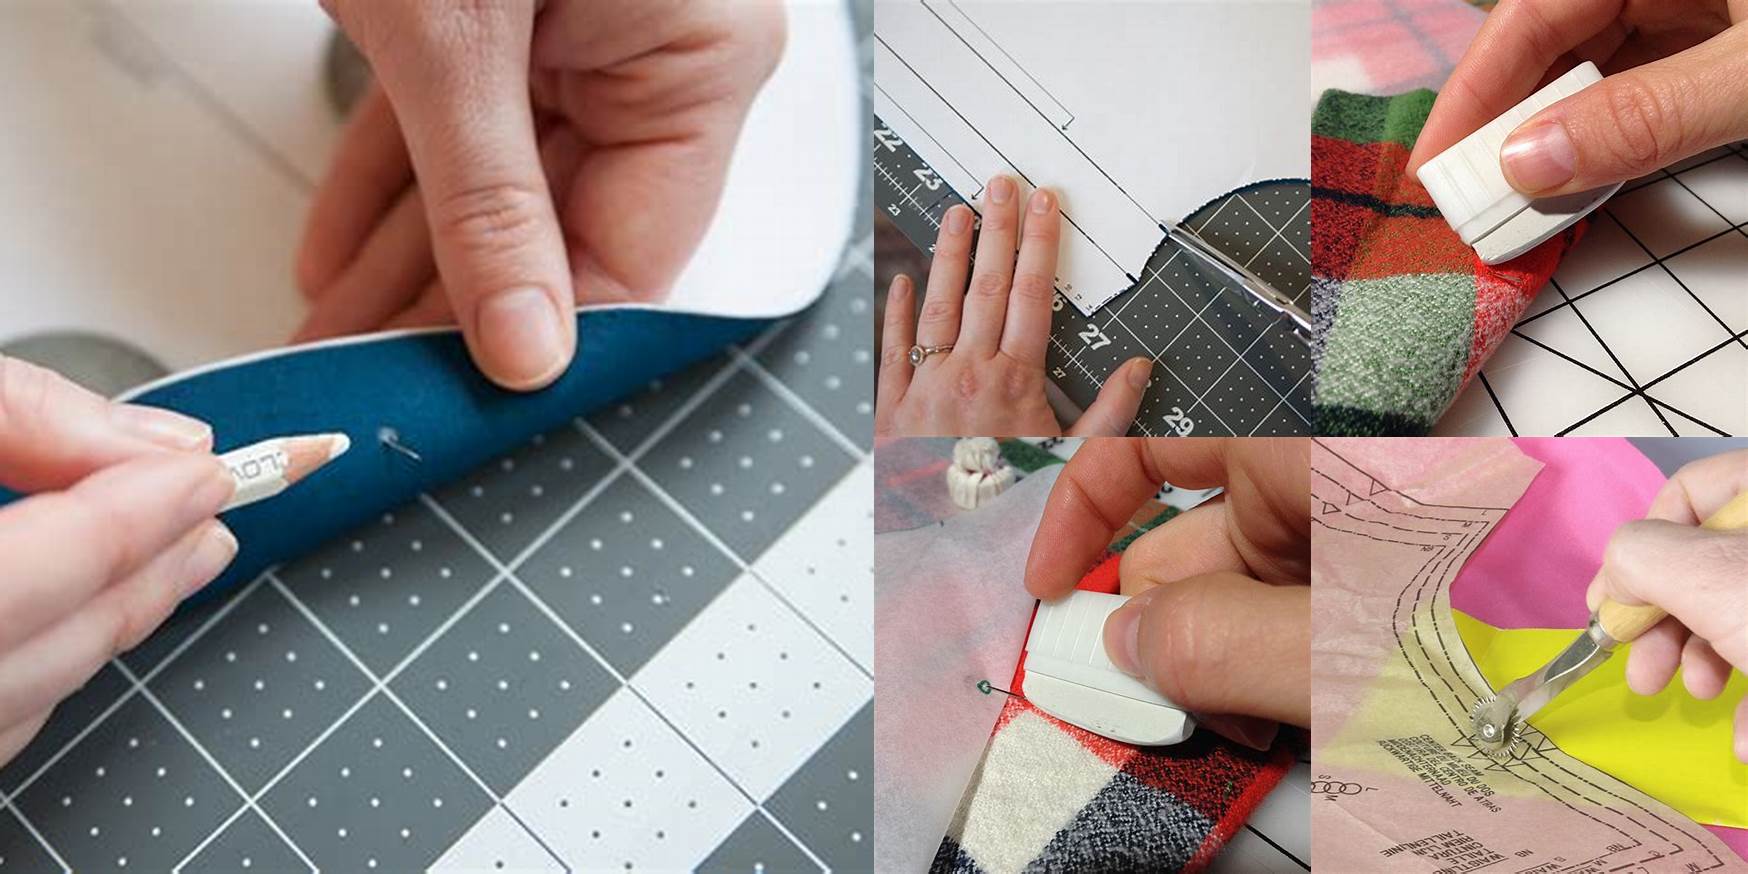 How To Mark Fabric For Cutting